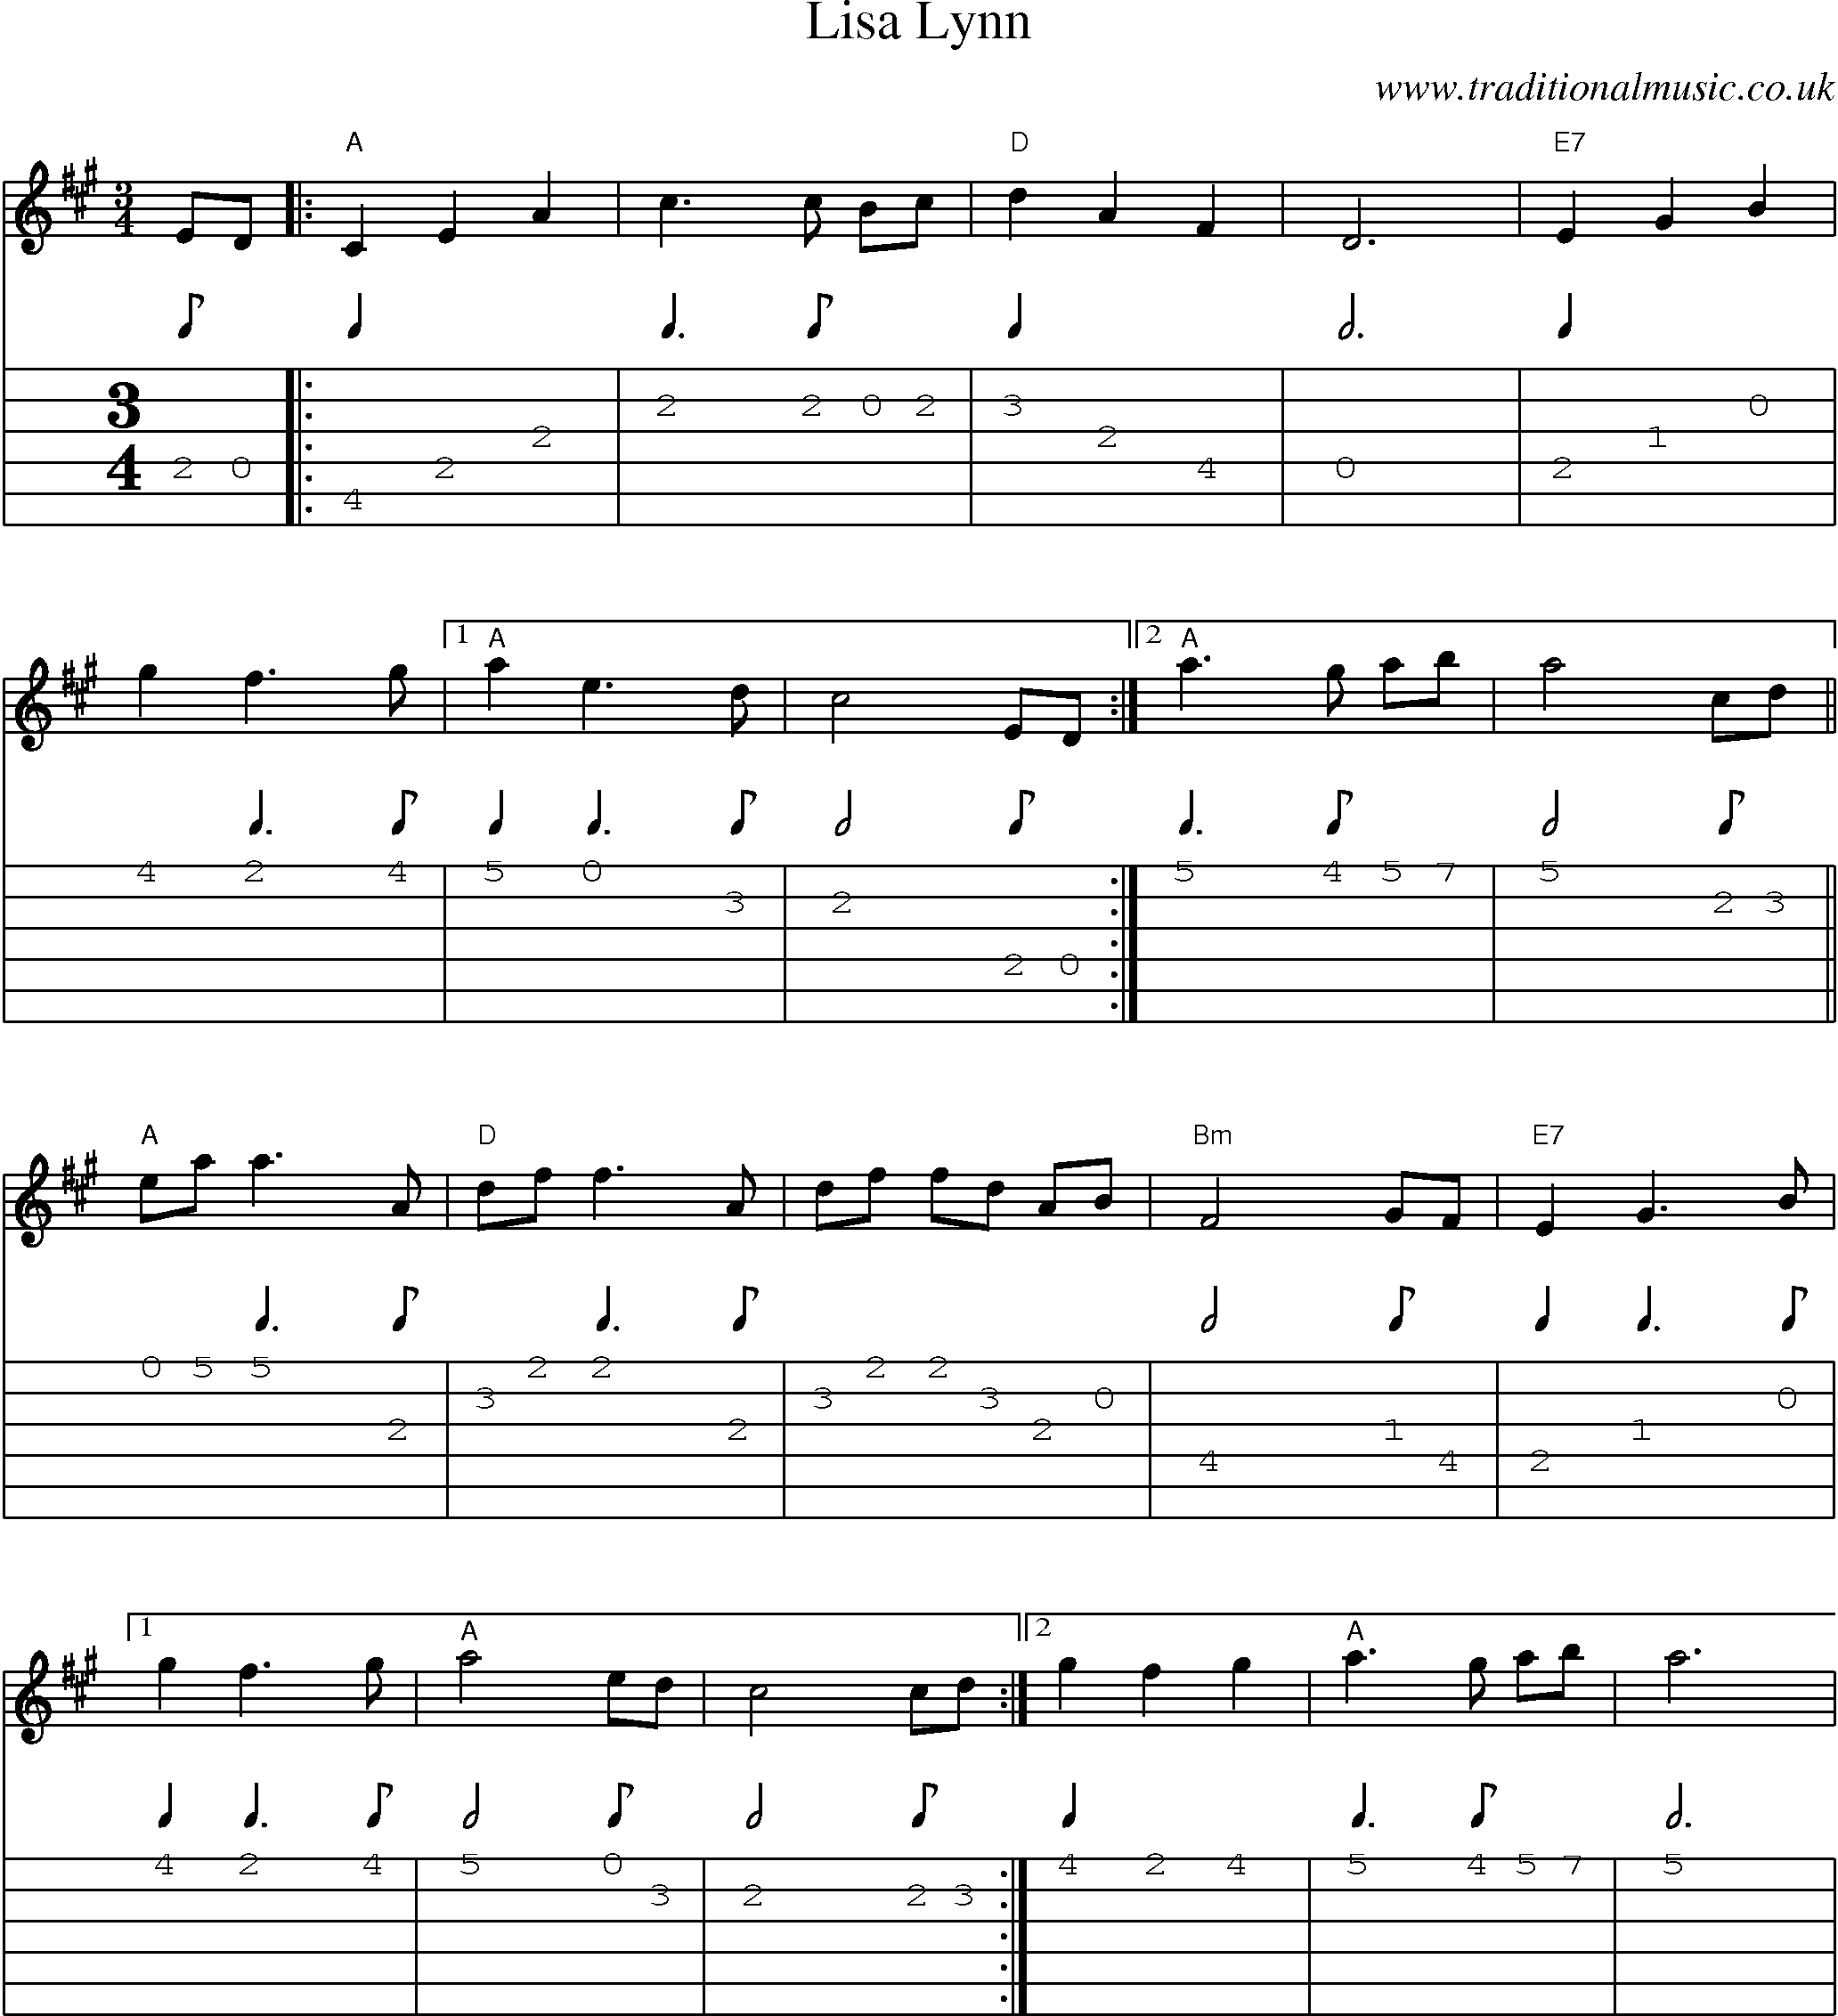 Music Score and Guitar Tabs for Lisa Lynn